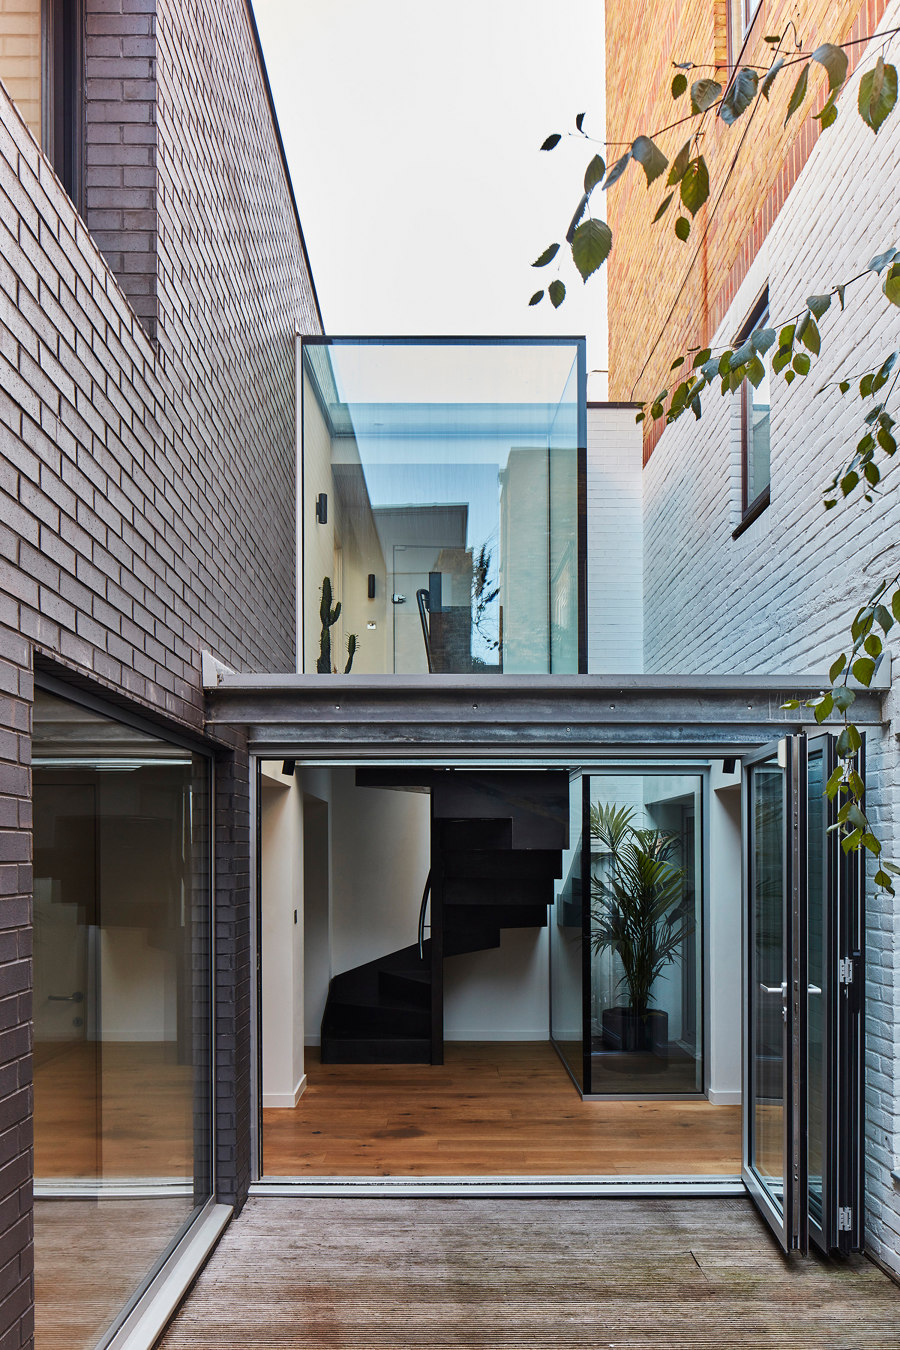 Wornington Road by EMULSION | Detached houses